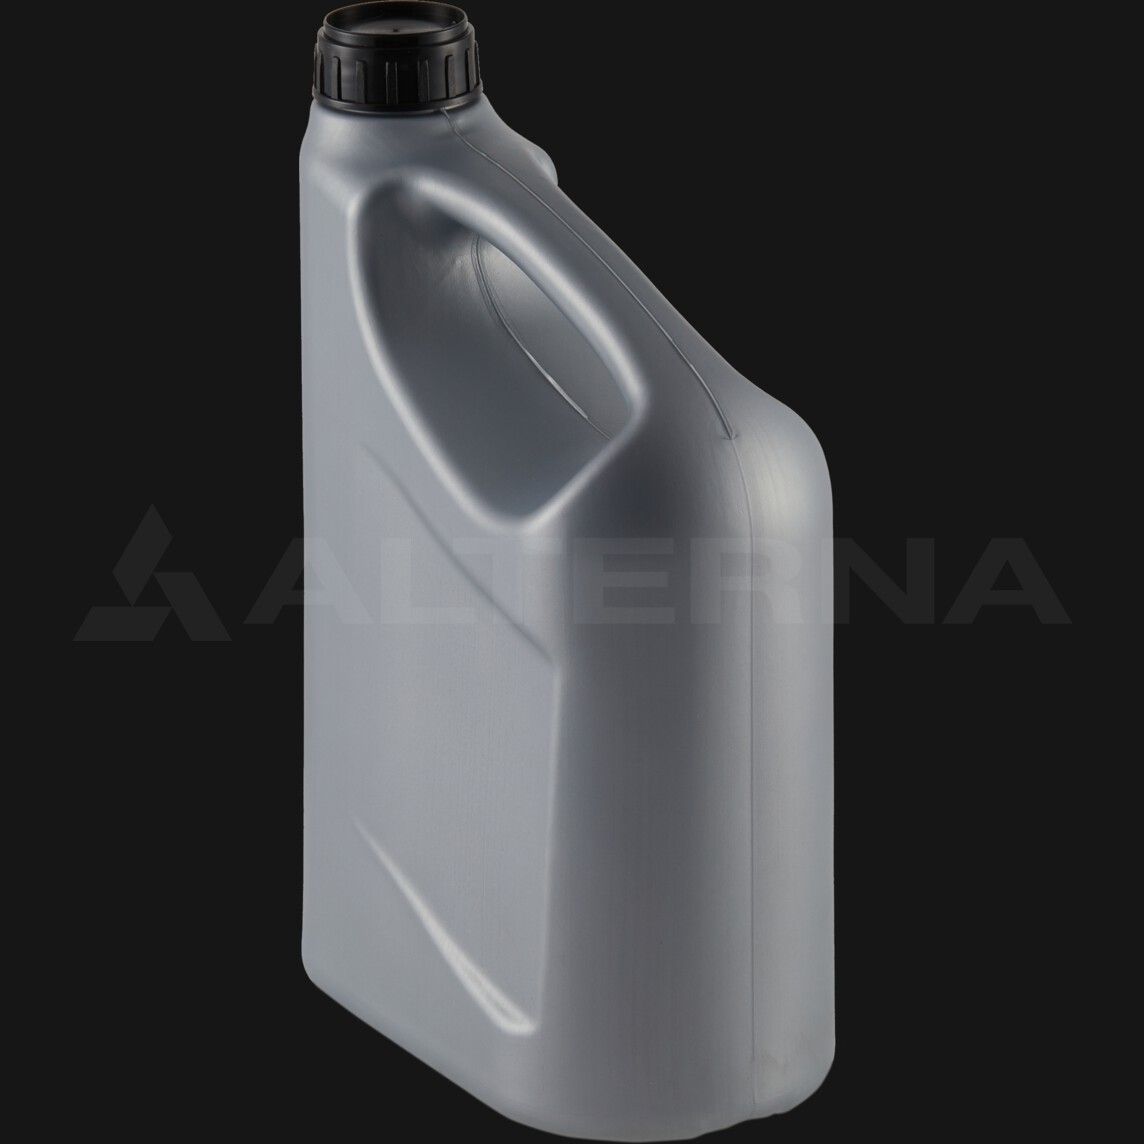 Baritainer Jerry Can, Natural, HDPE/Quoral 5 L from Cole-Parmer